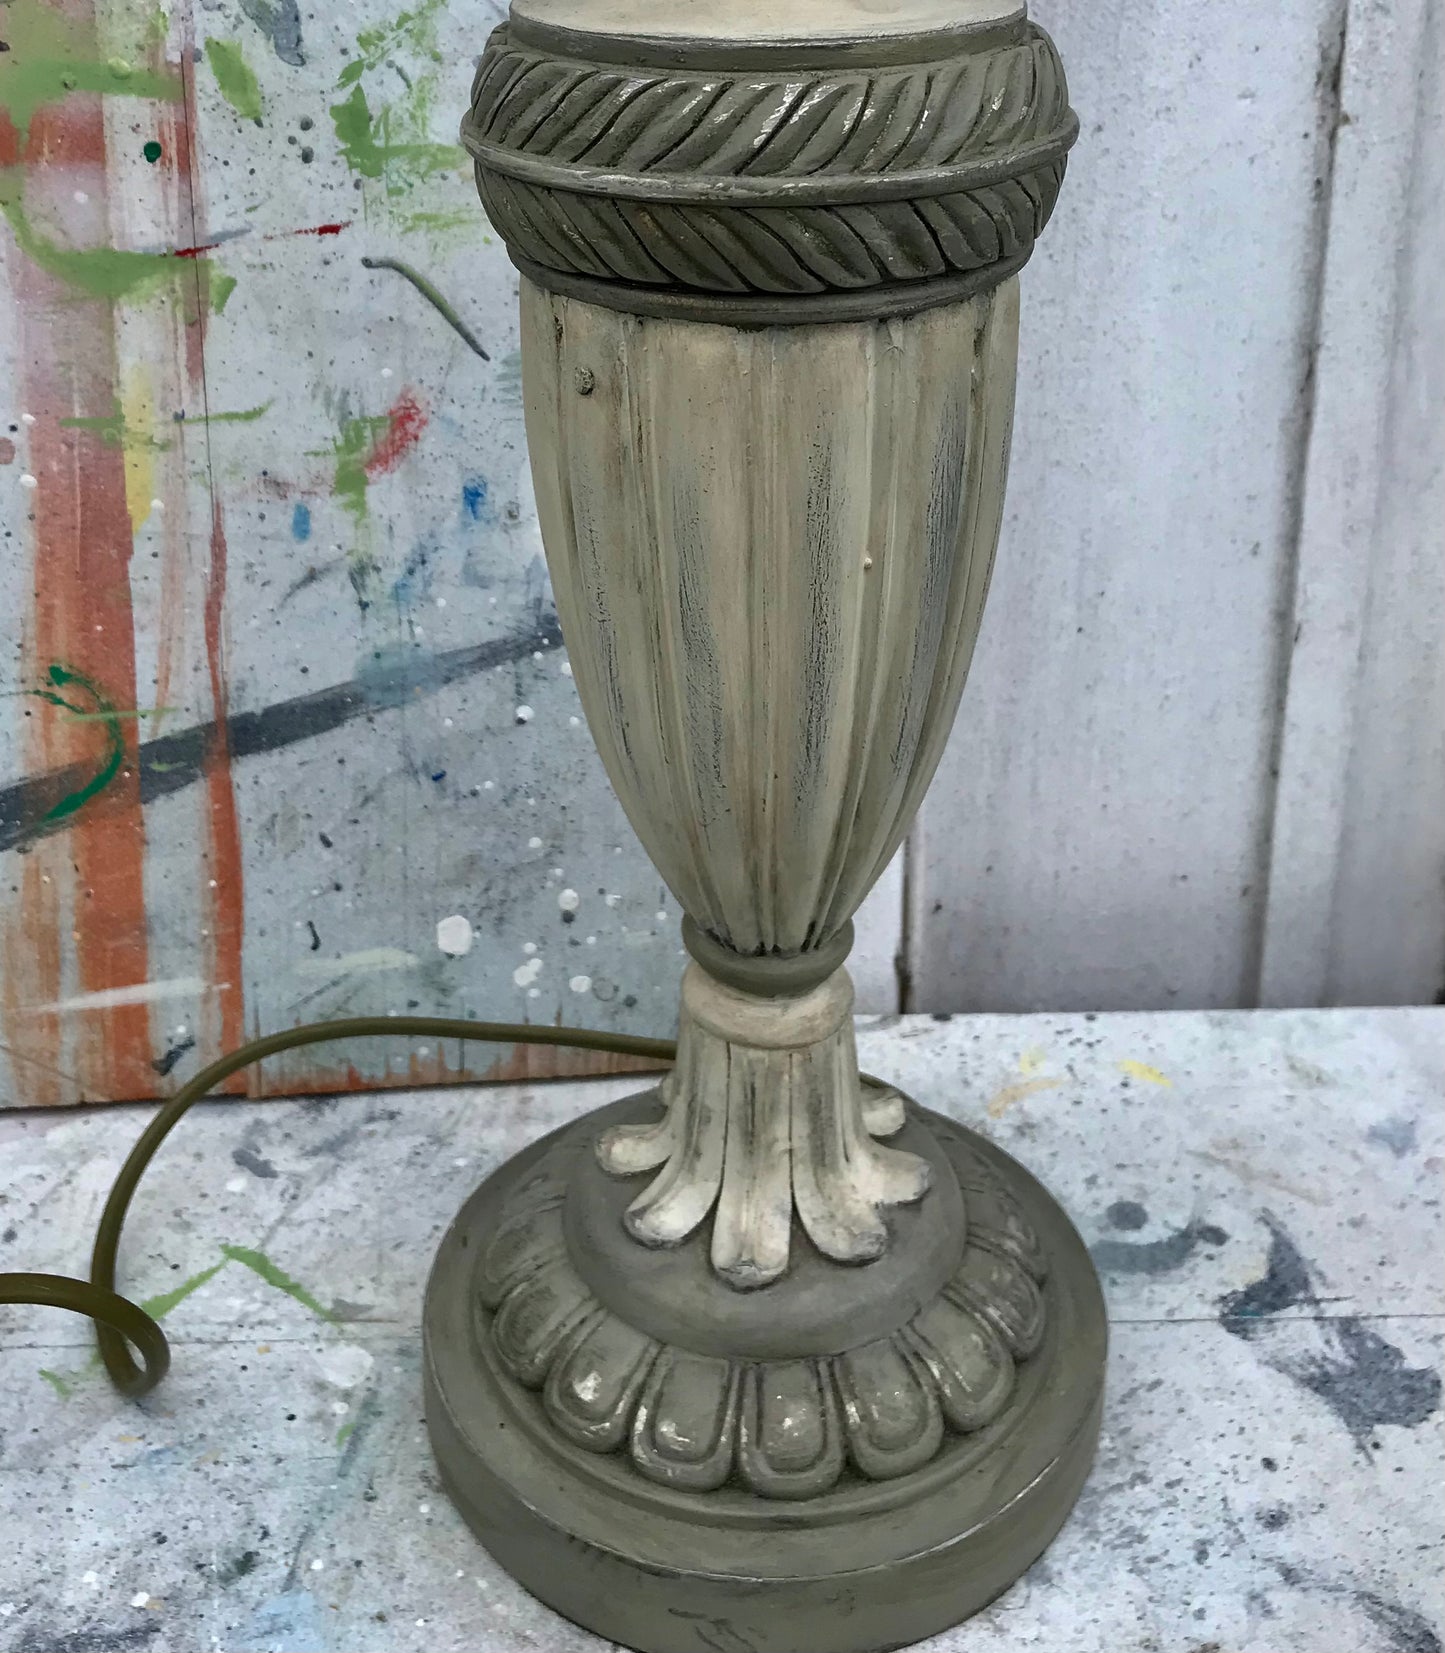 Vintage Lamp revamp - Re wired and painted in a vintage style